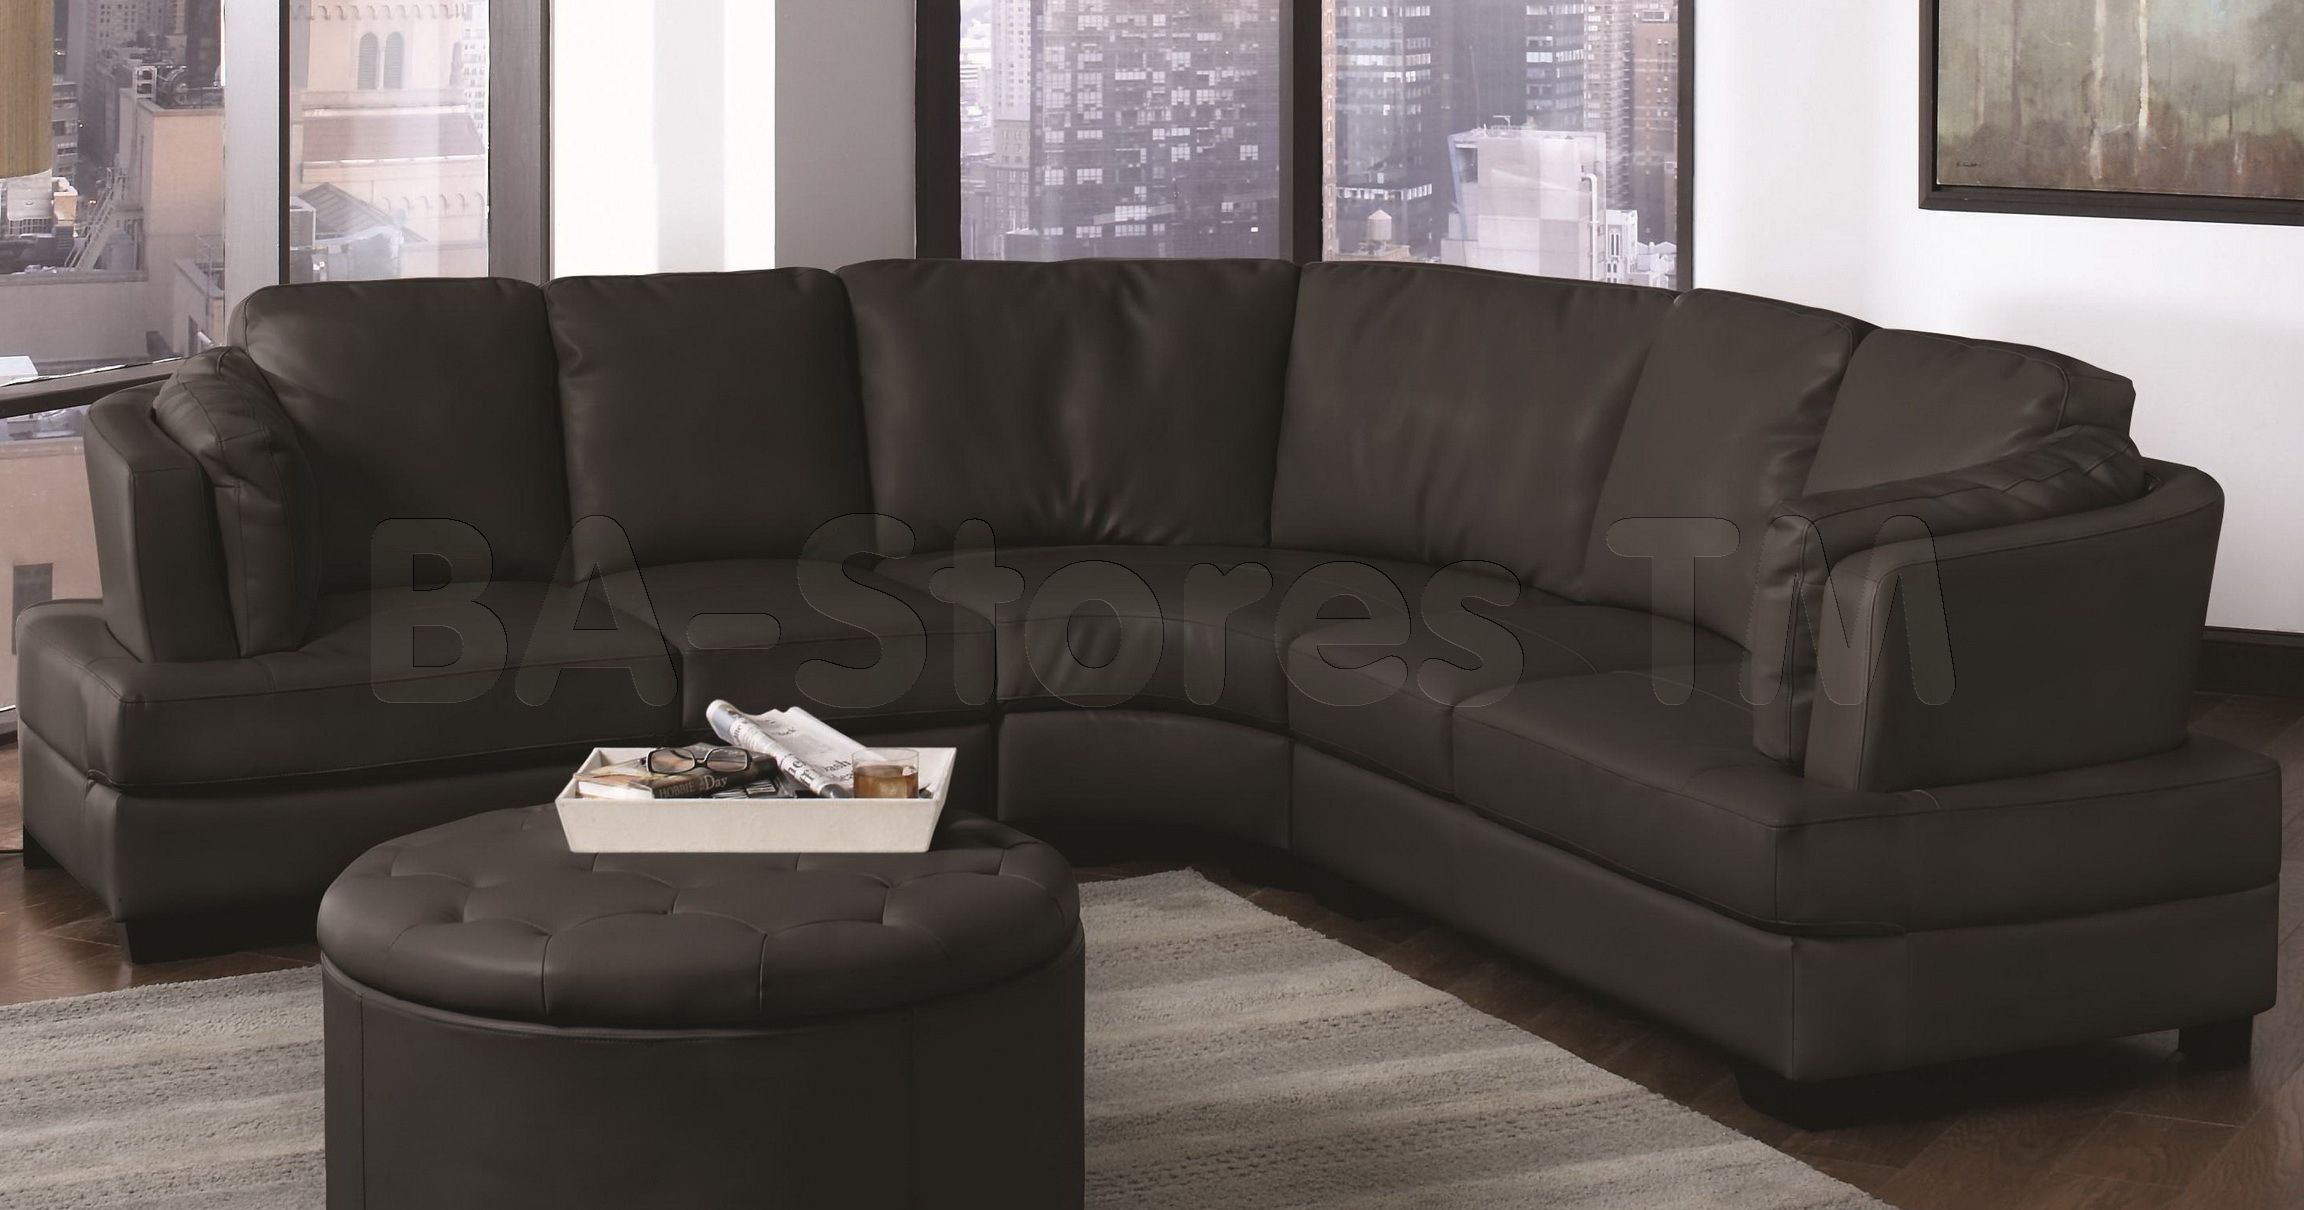 Amazing Round Sectional Sofa 63 With Additional Modern Sofa Ideas Inside Round Sectional Sofas (View 3 of 10)